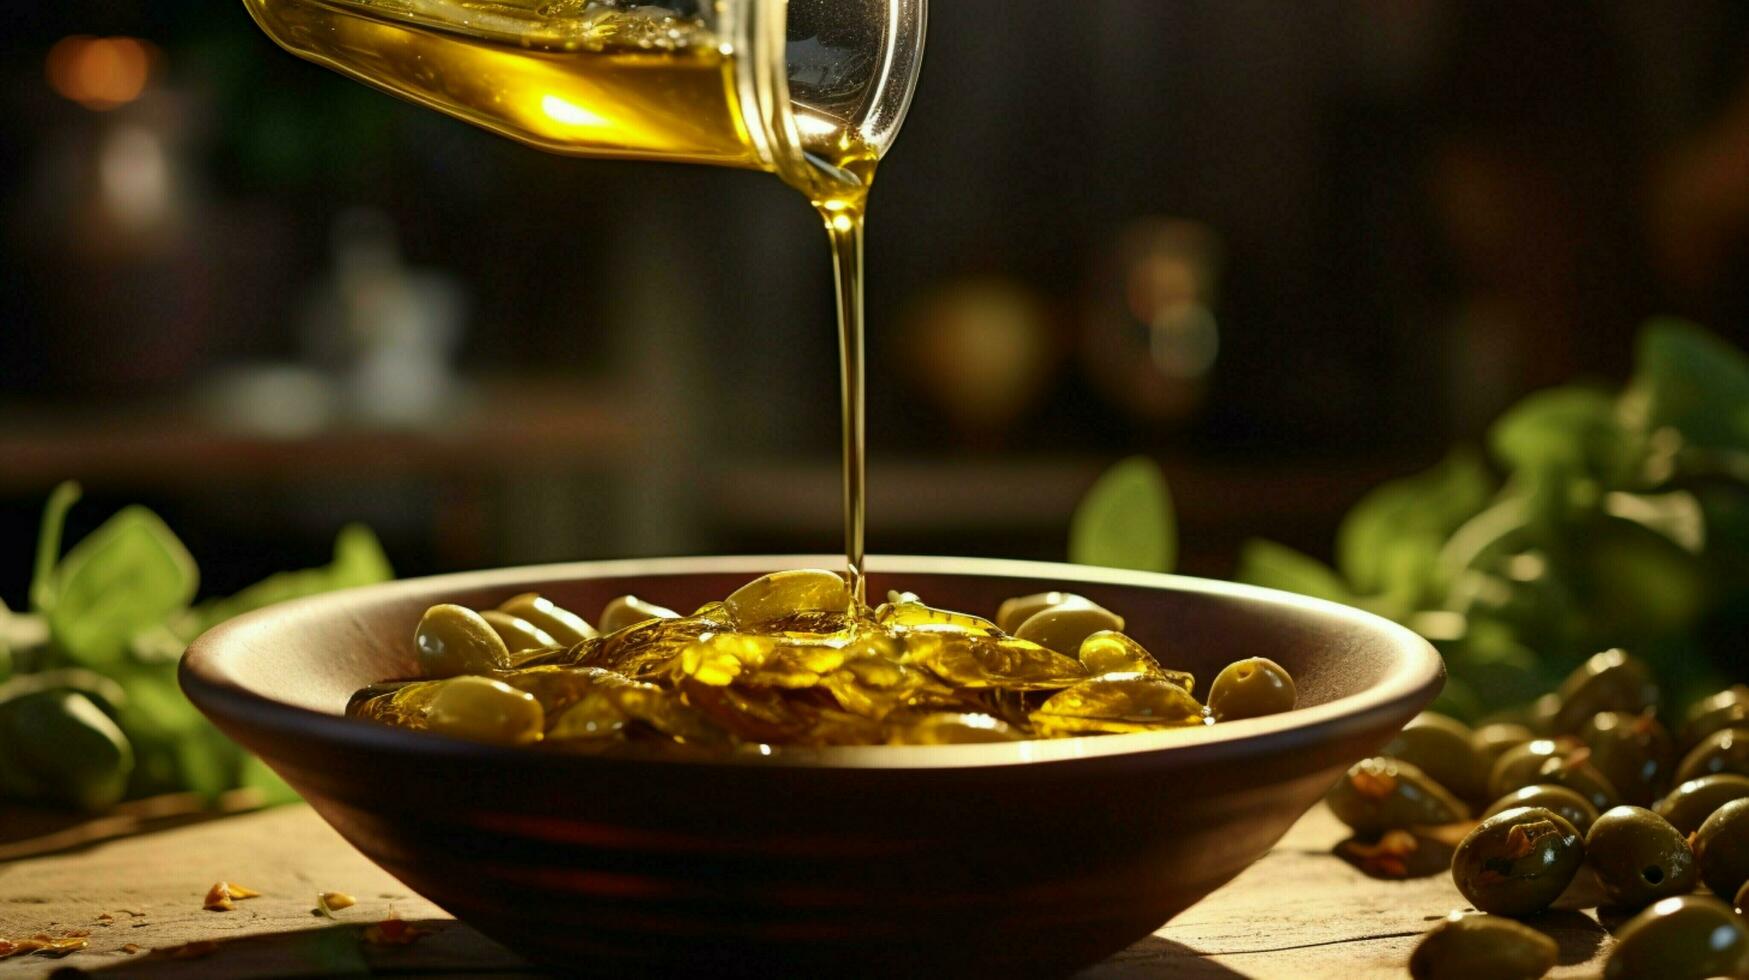 pouring olive oil into a bowl fresh and gourmet cooking photo